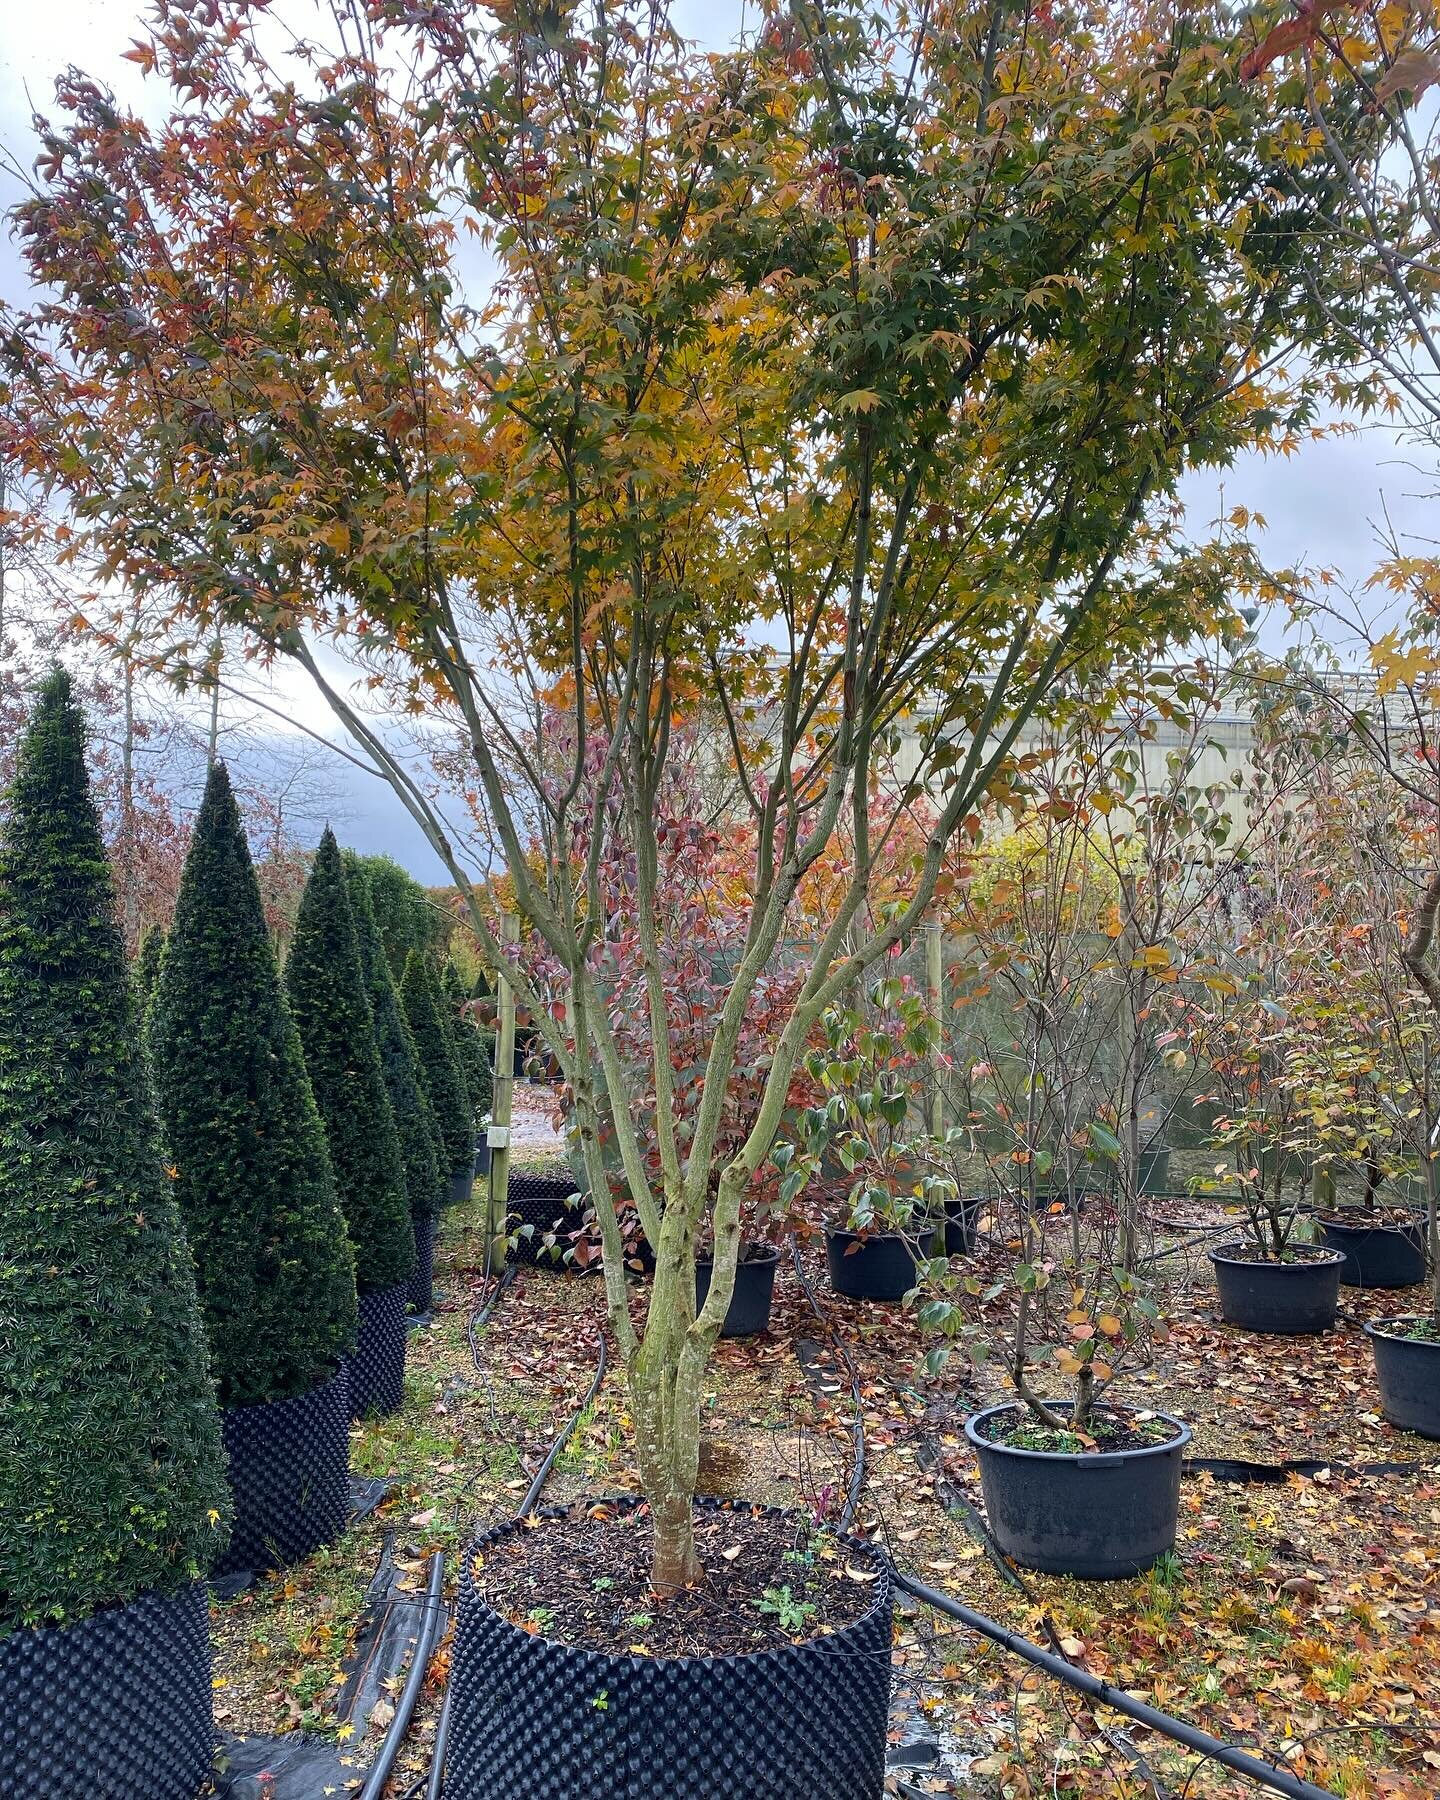 Tagging trees at @griffinnurseries yesterday with clients. I do love this part of my job!

.
#lovemyjob #gardendesigner #trees #plantingdesign #nursery #specimen #acer #cornus #pleachedtrees 
#gardendesignsurrey #gardendesignsussex